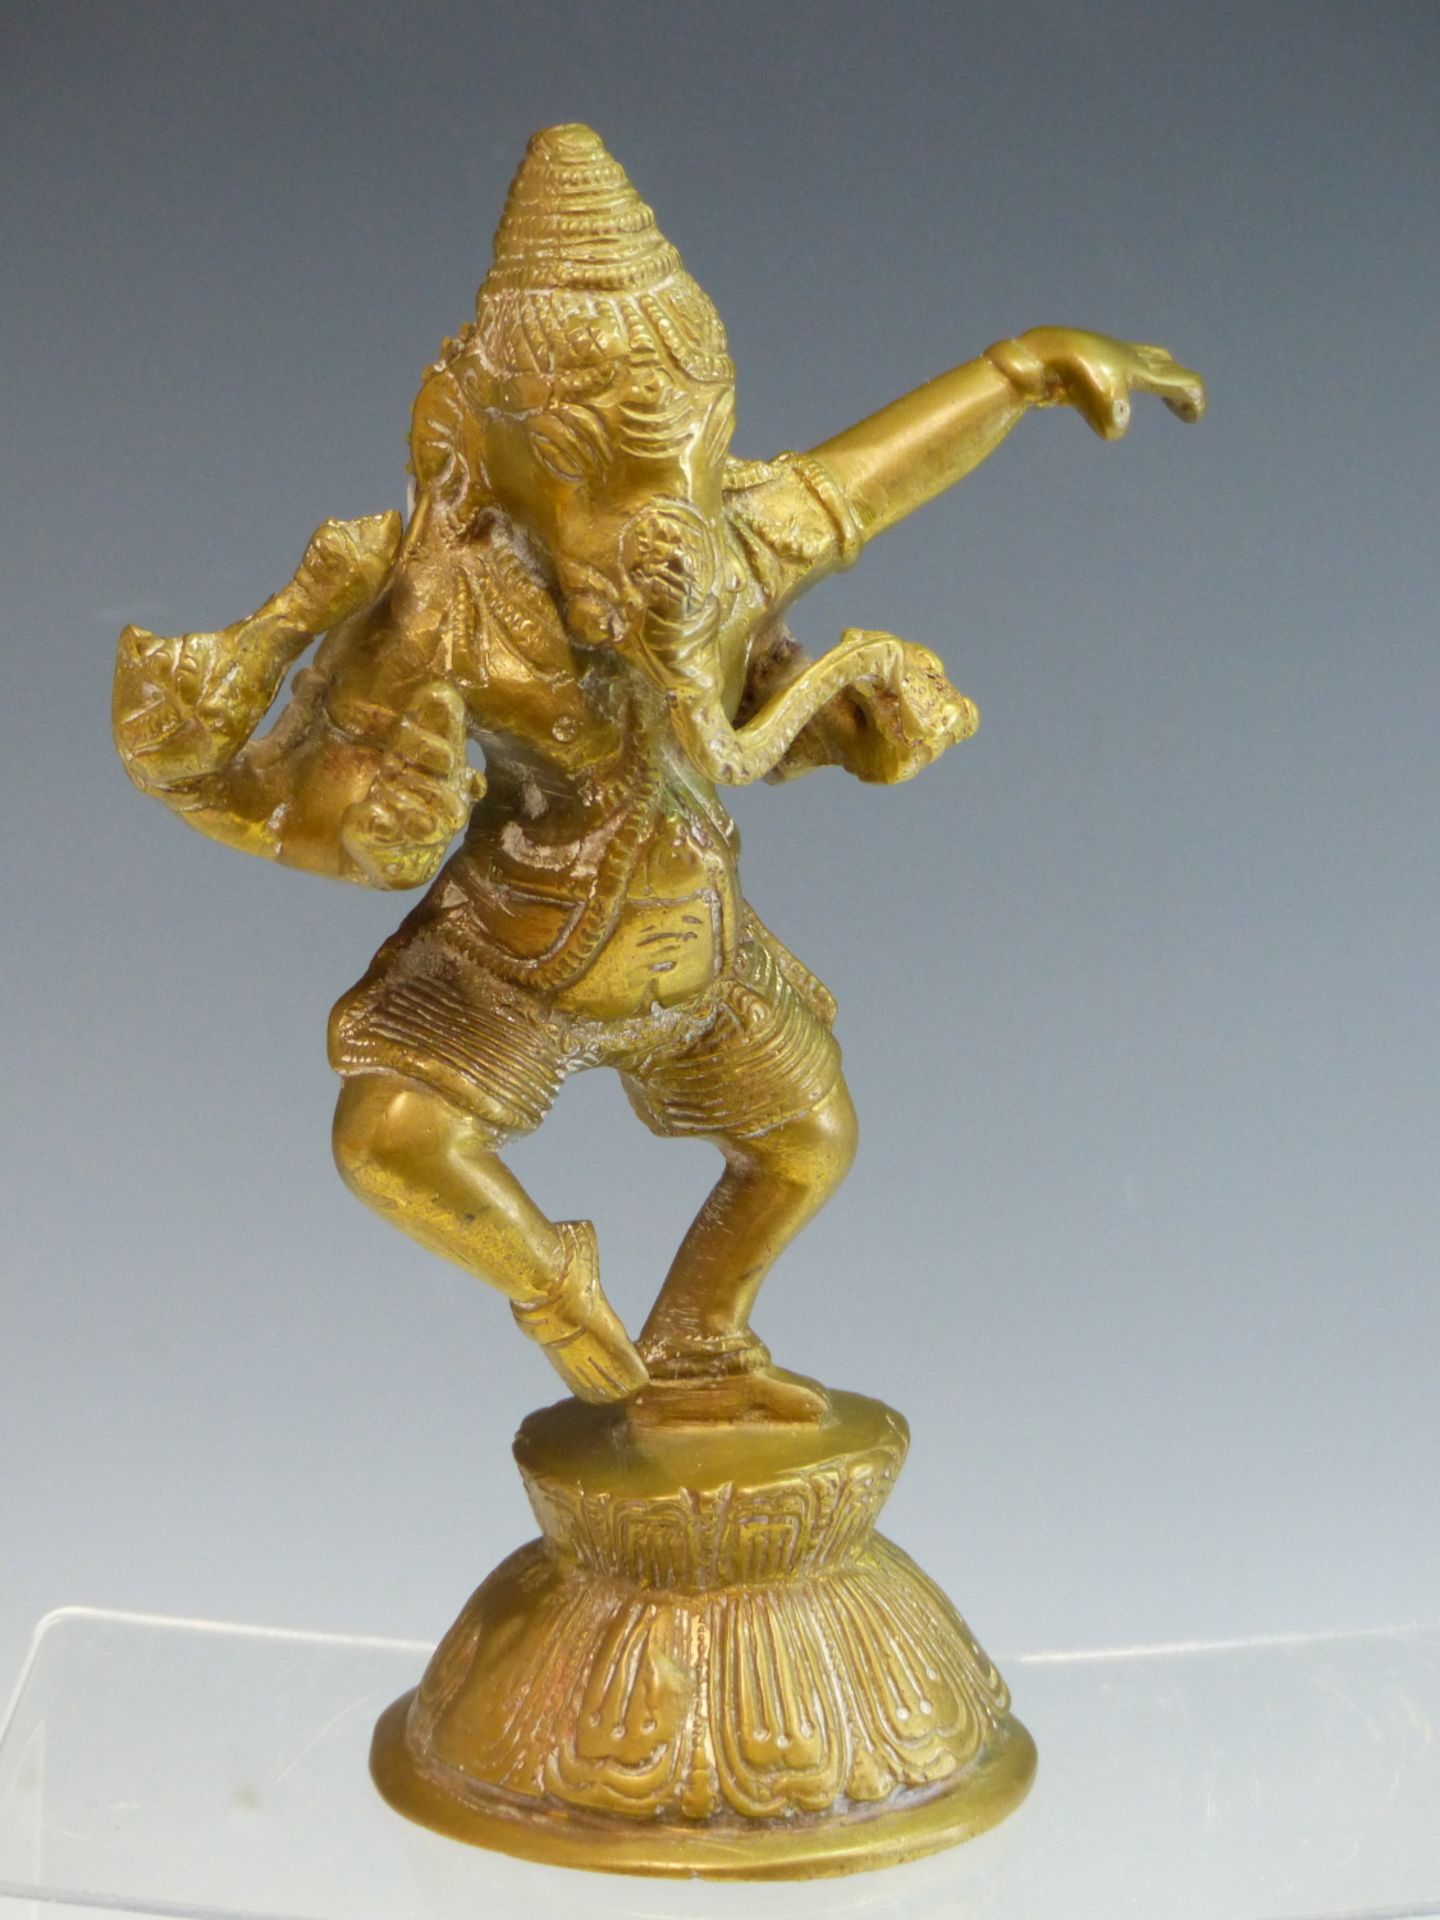 A CAST BRASS INDIAN FIGURE OF THE GOD GANESHA (20TH CENTURY) 21 cm HIGH. - Image 2 of 3